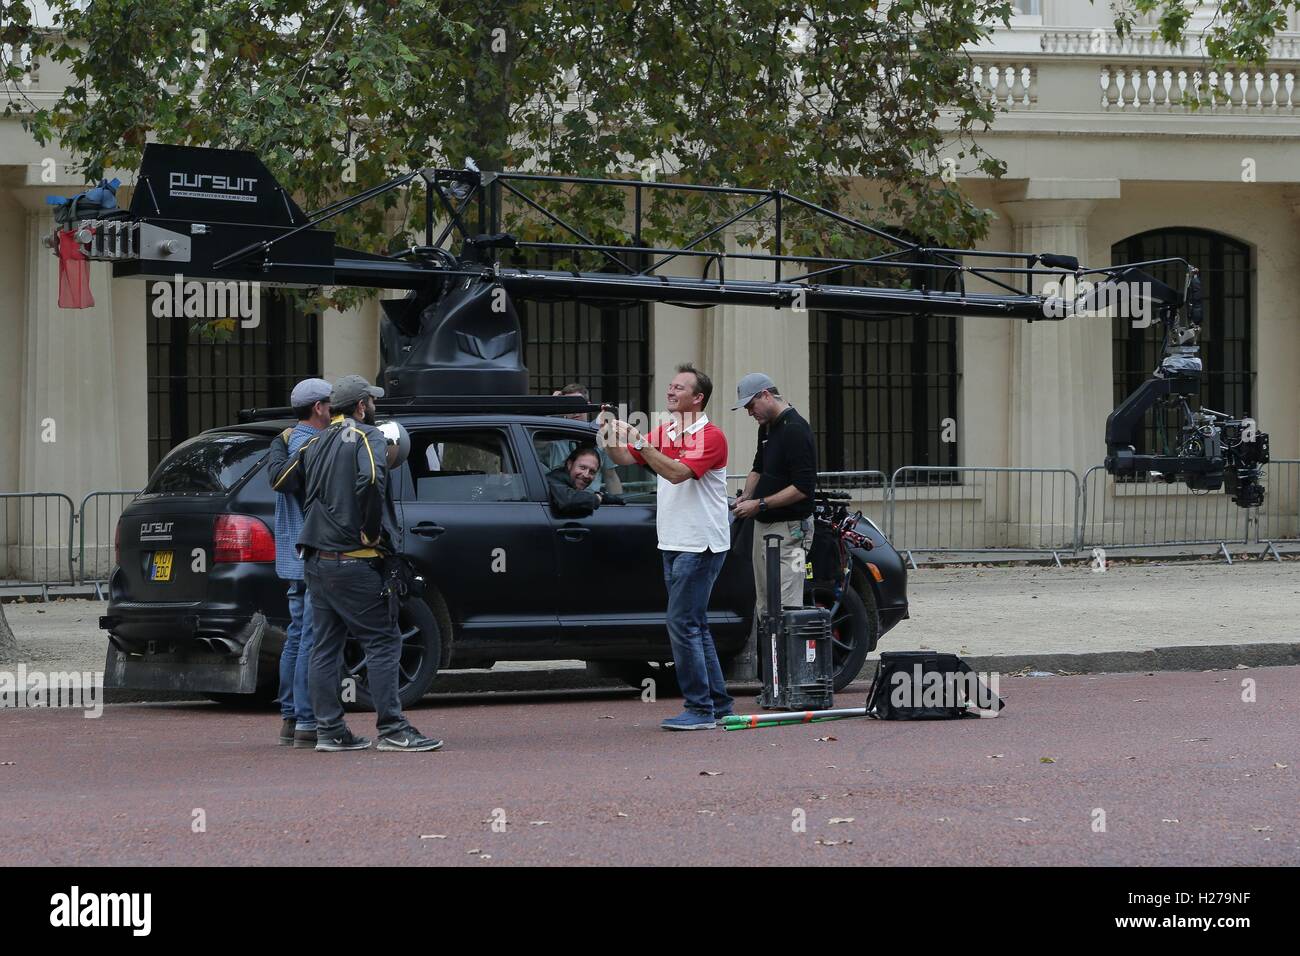 People take pictures next to a car camera rig during filming of the film Transformers: The Last Knight, on The Mall in London. Stock Photo